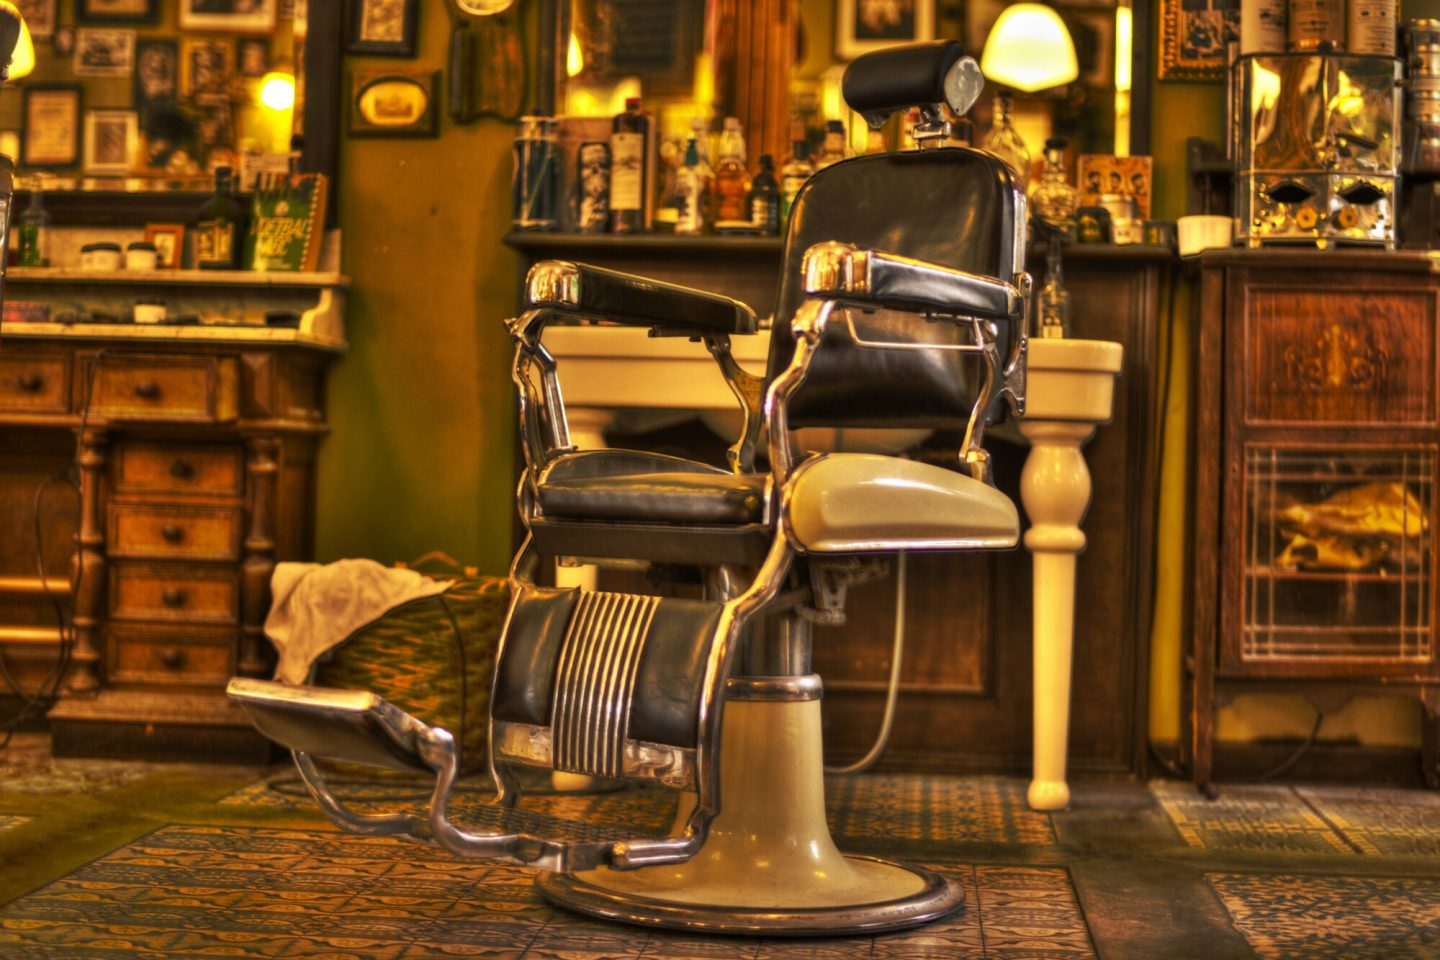 How to Find Barber School Scholarships in 5 Simple Steps